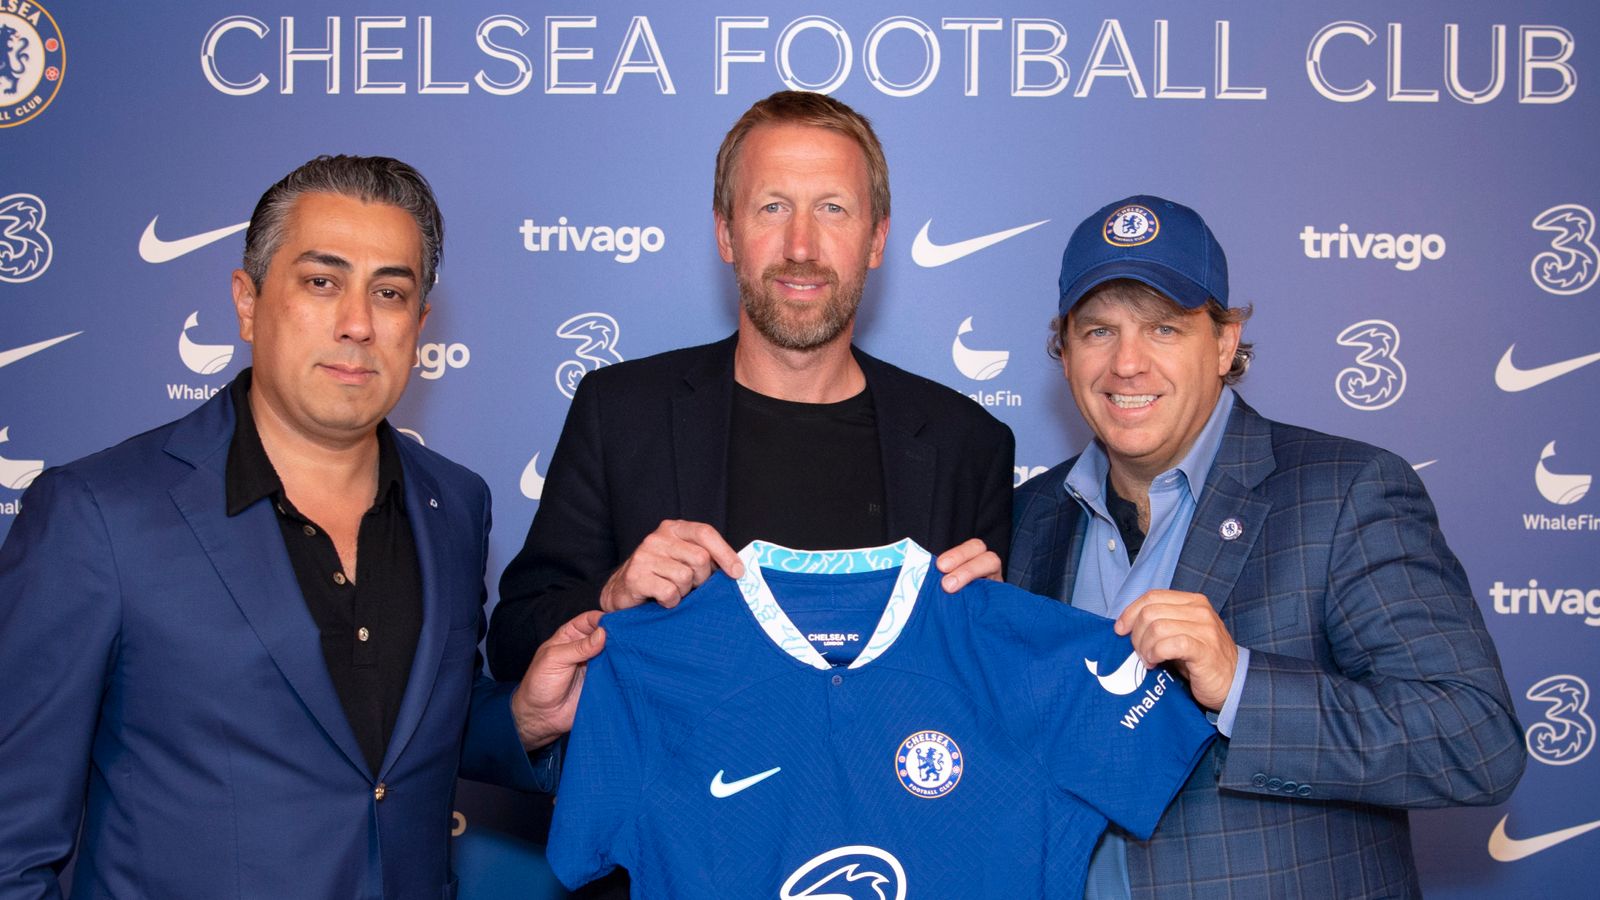 Todd Boehly 'concerned' over Chelsea squad as new Blues owner